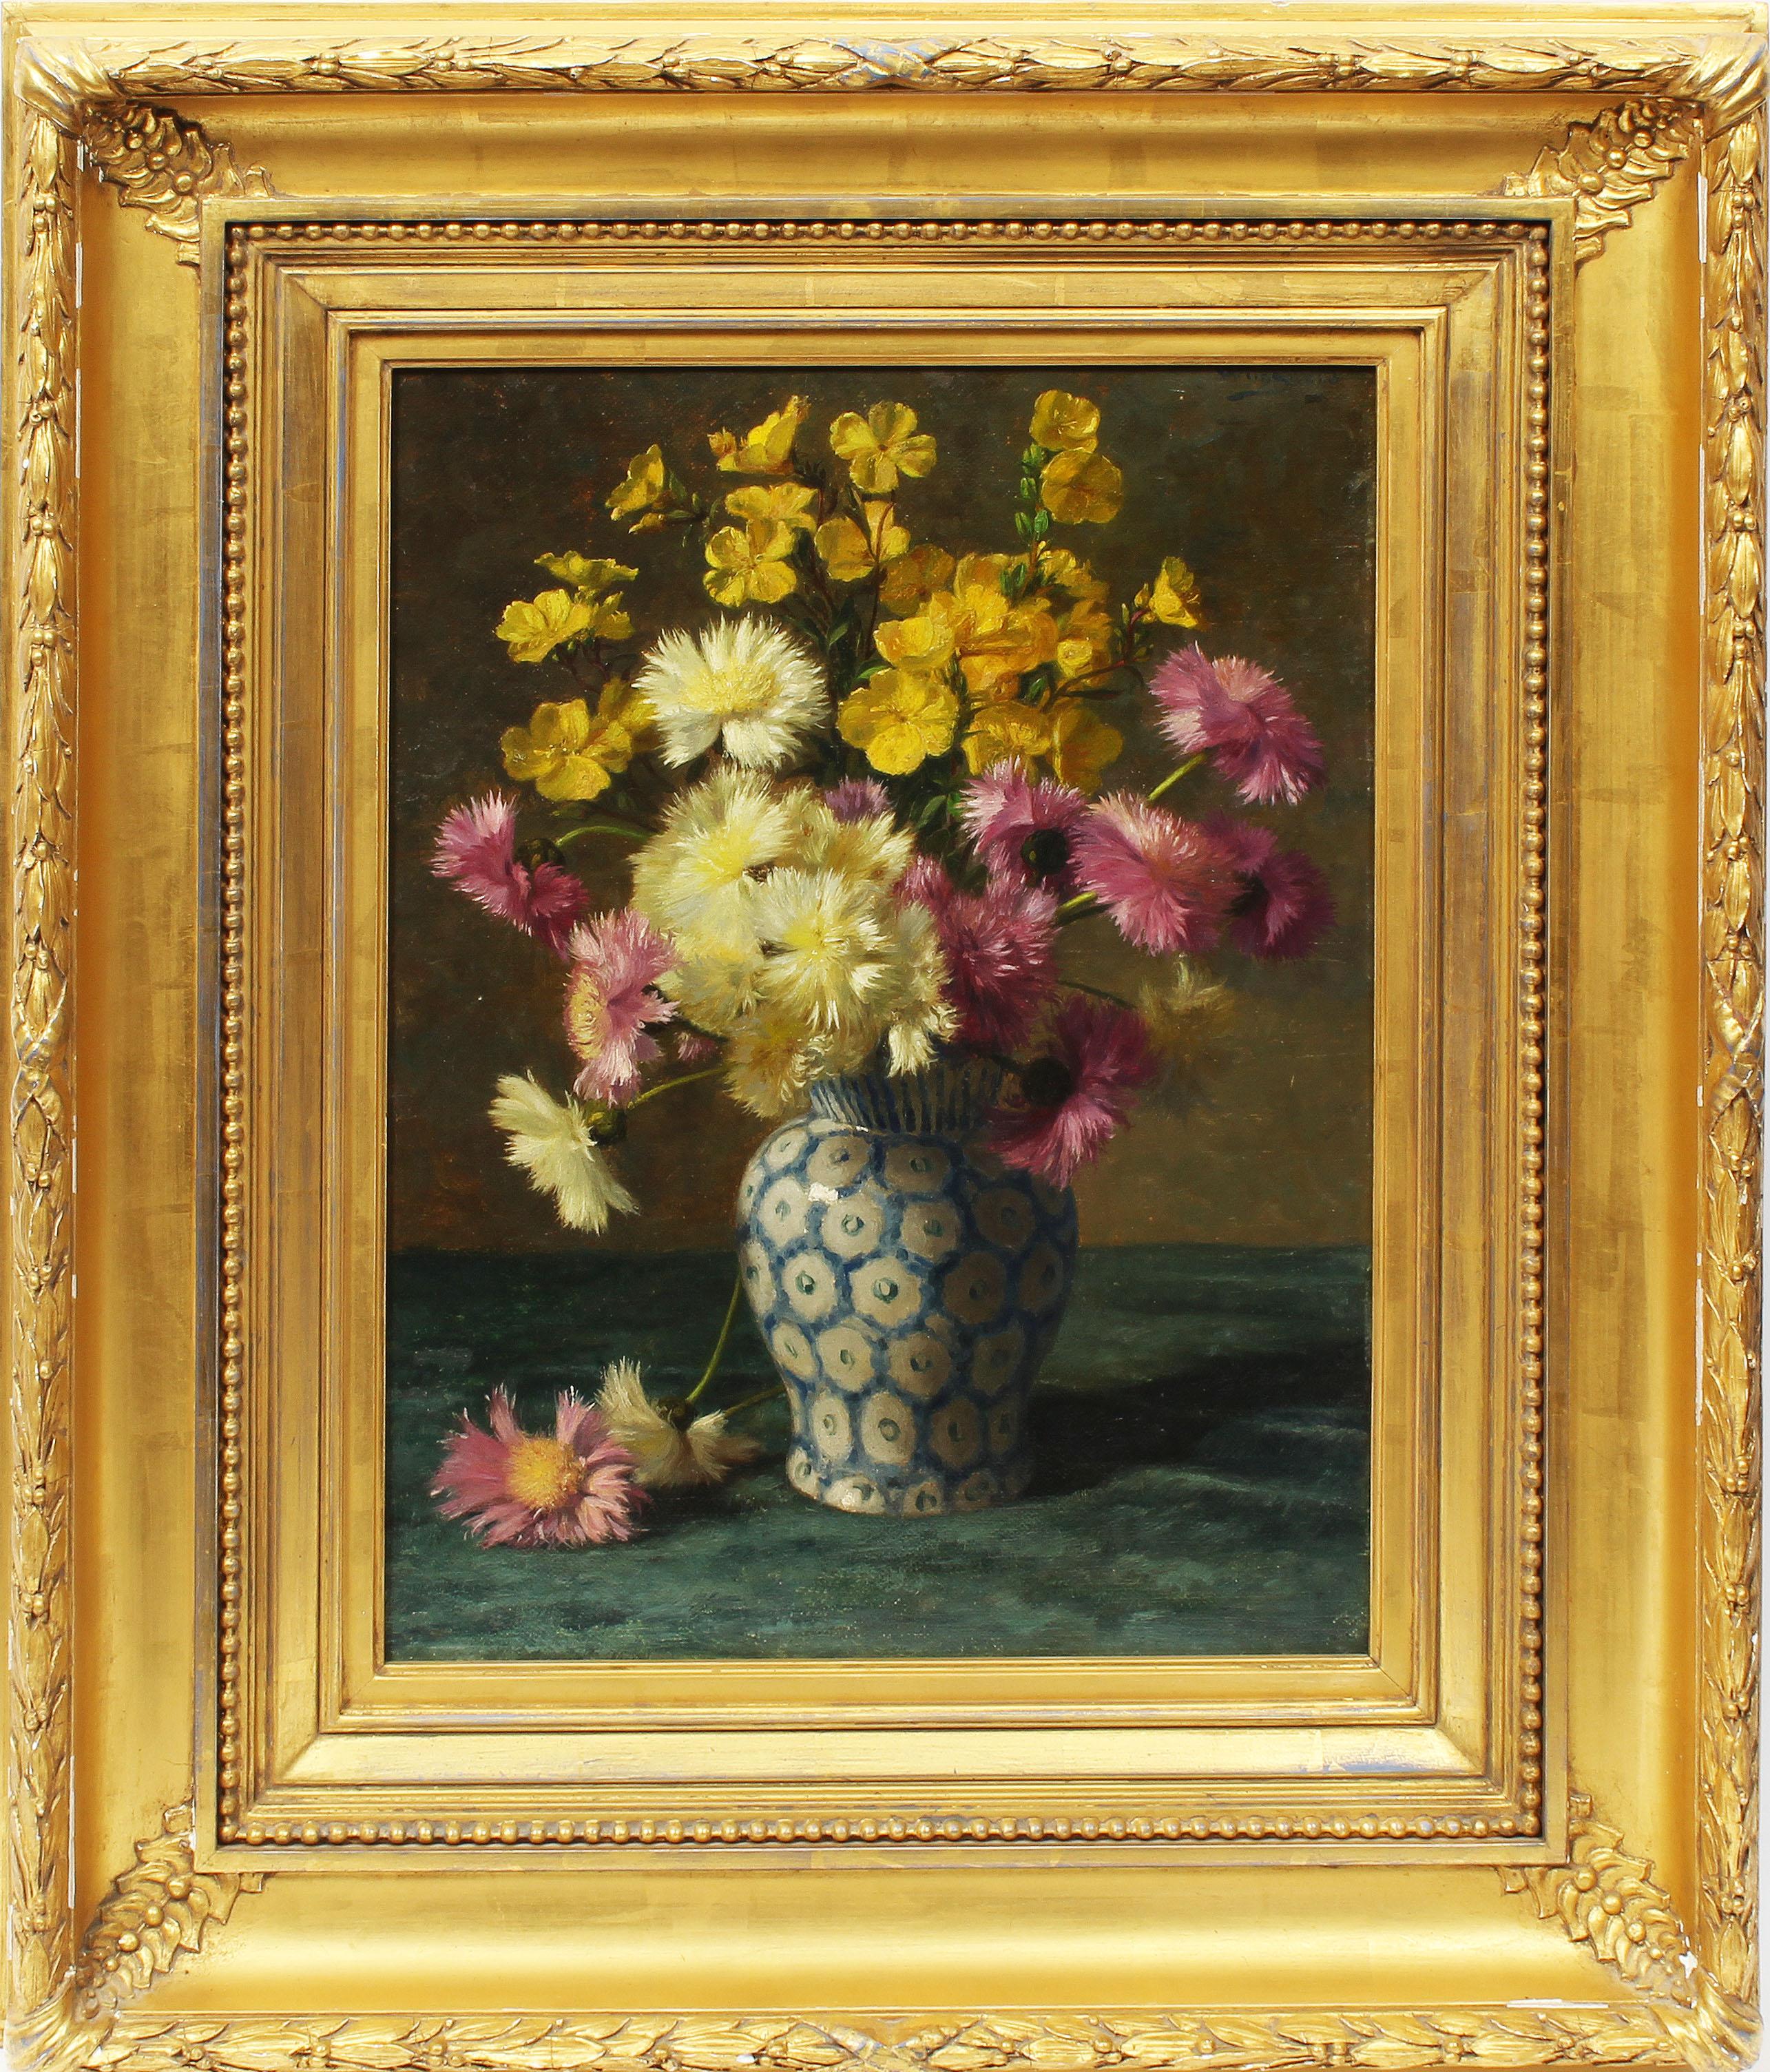 Unknown Interior Painting - Antique American Realist Flower Still Life Signed Exceptional Rare Oil Painting